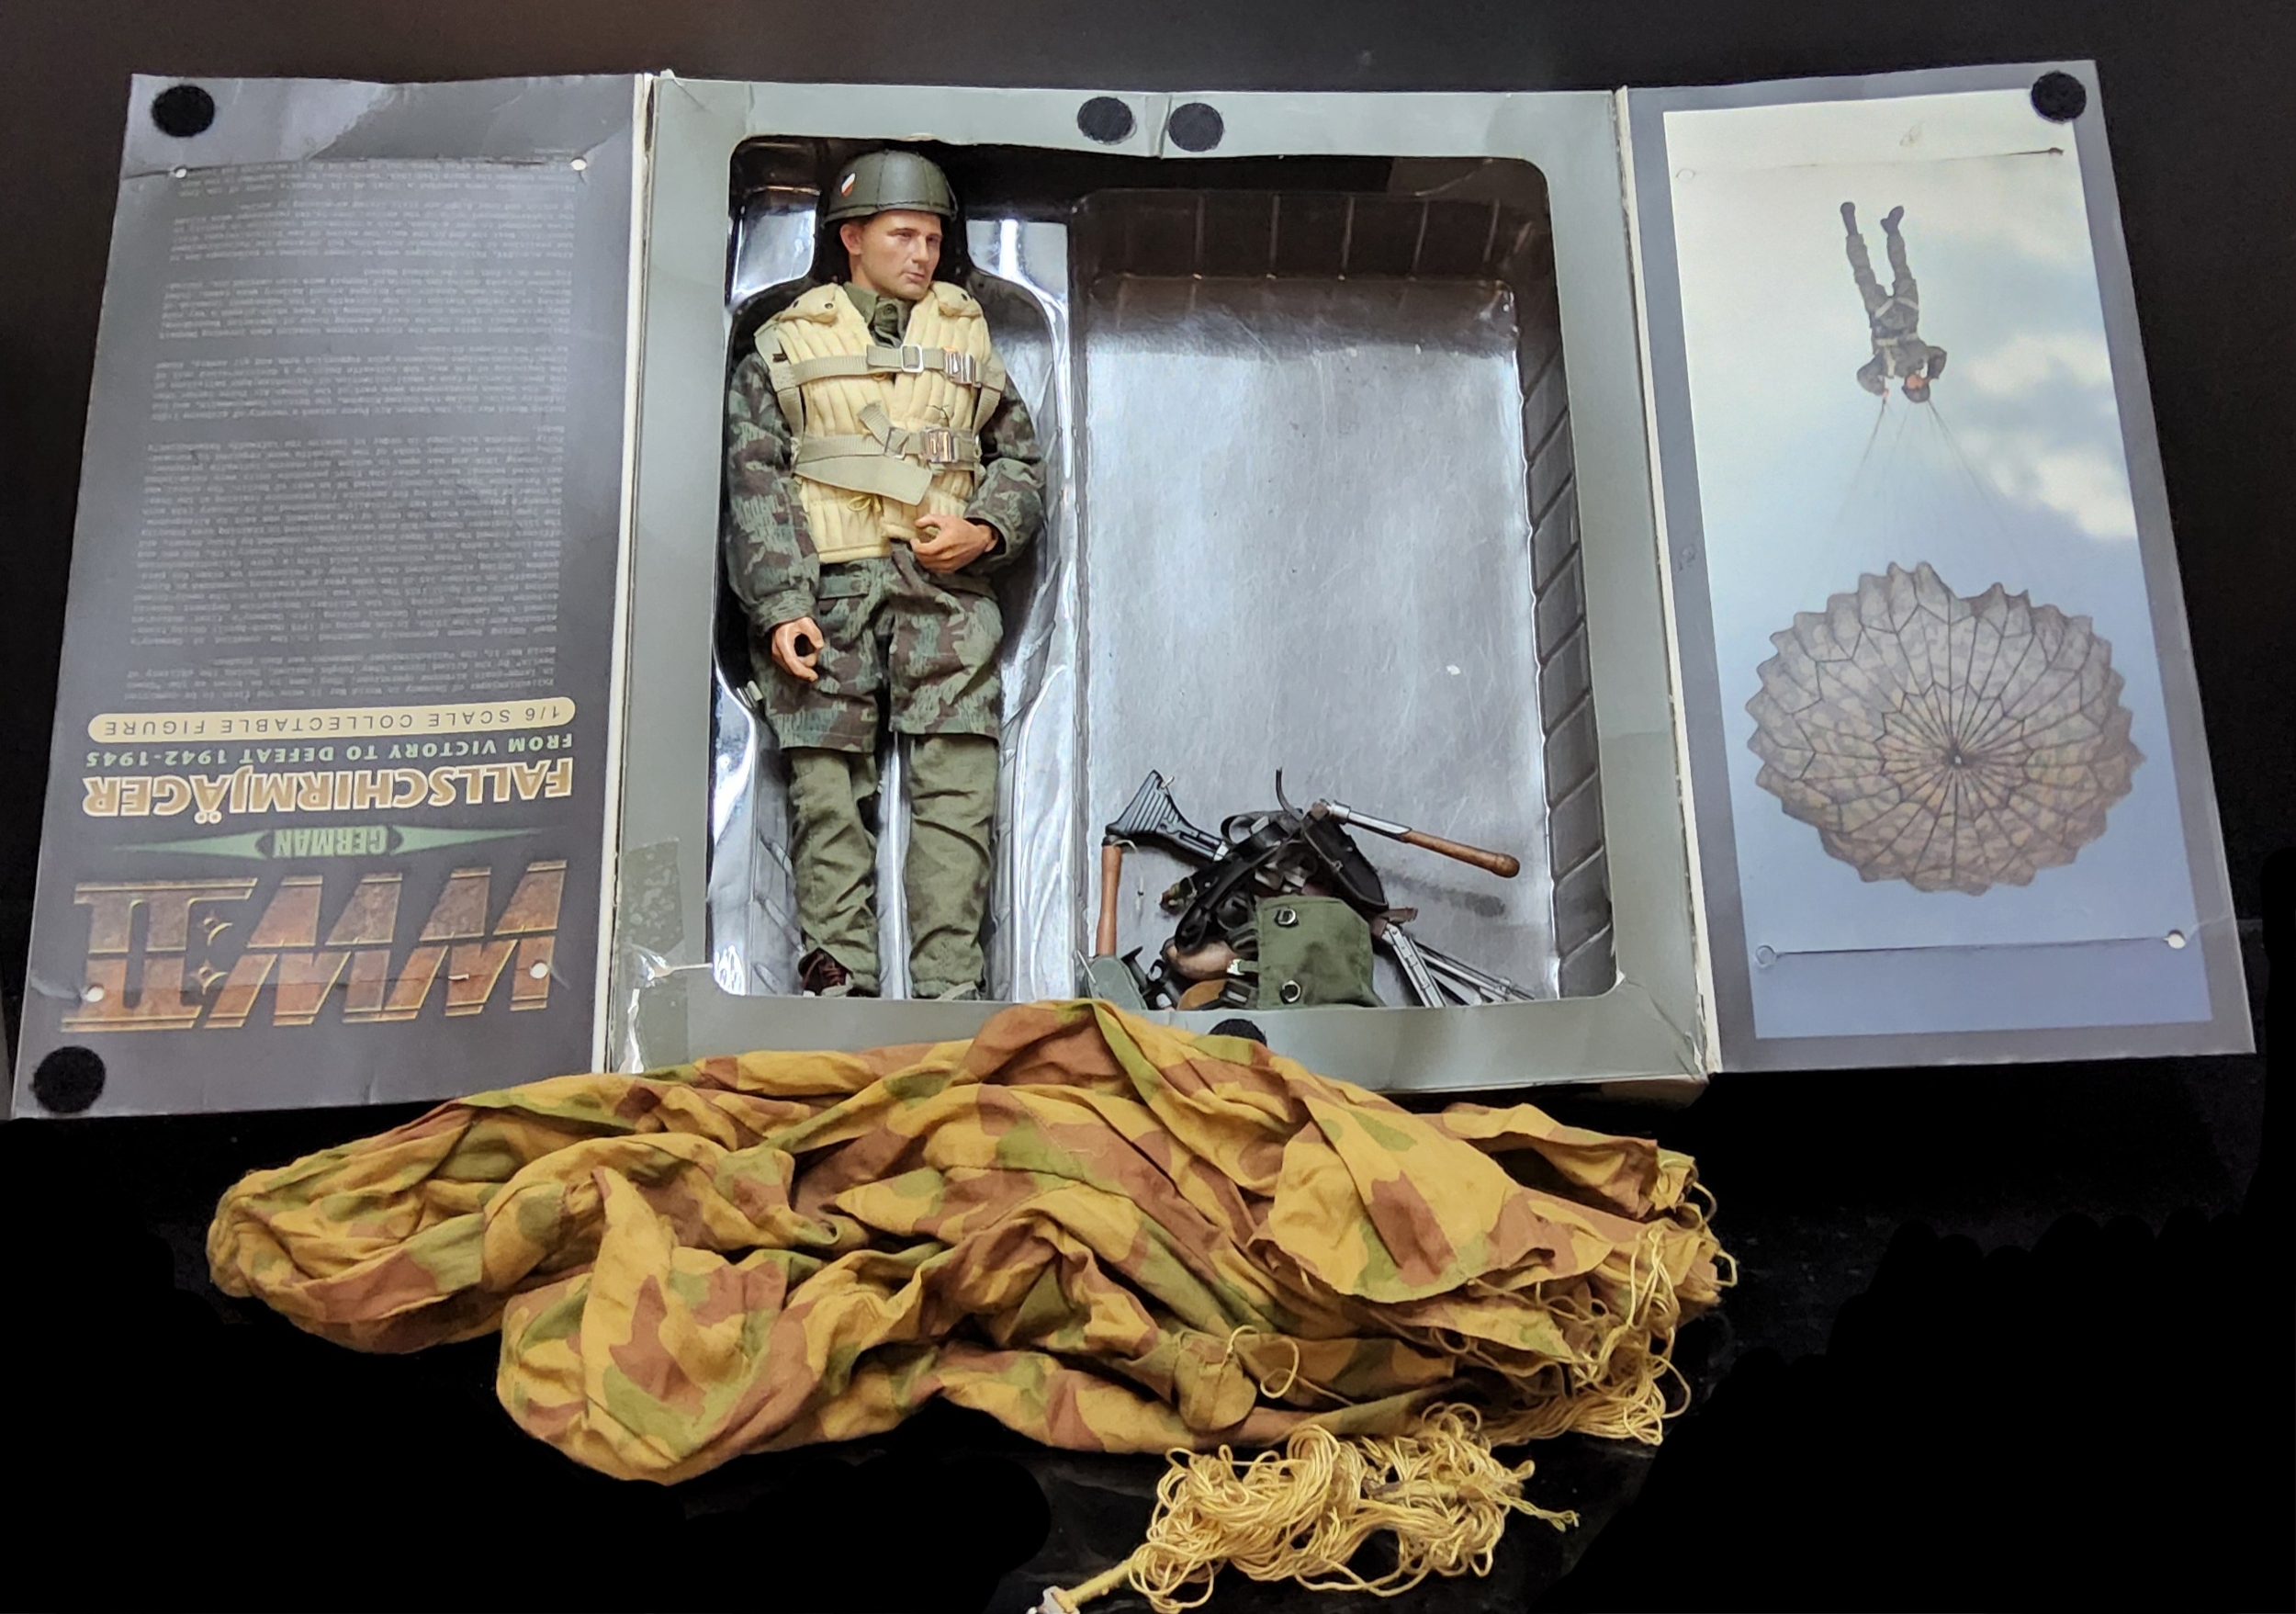 Fallschirmjäger From Victory To Defeat 1942-1945 - Dirk Kluge Boxed 1/6th Scale Action figure. - Image 2 of 2